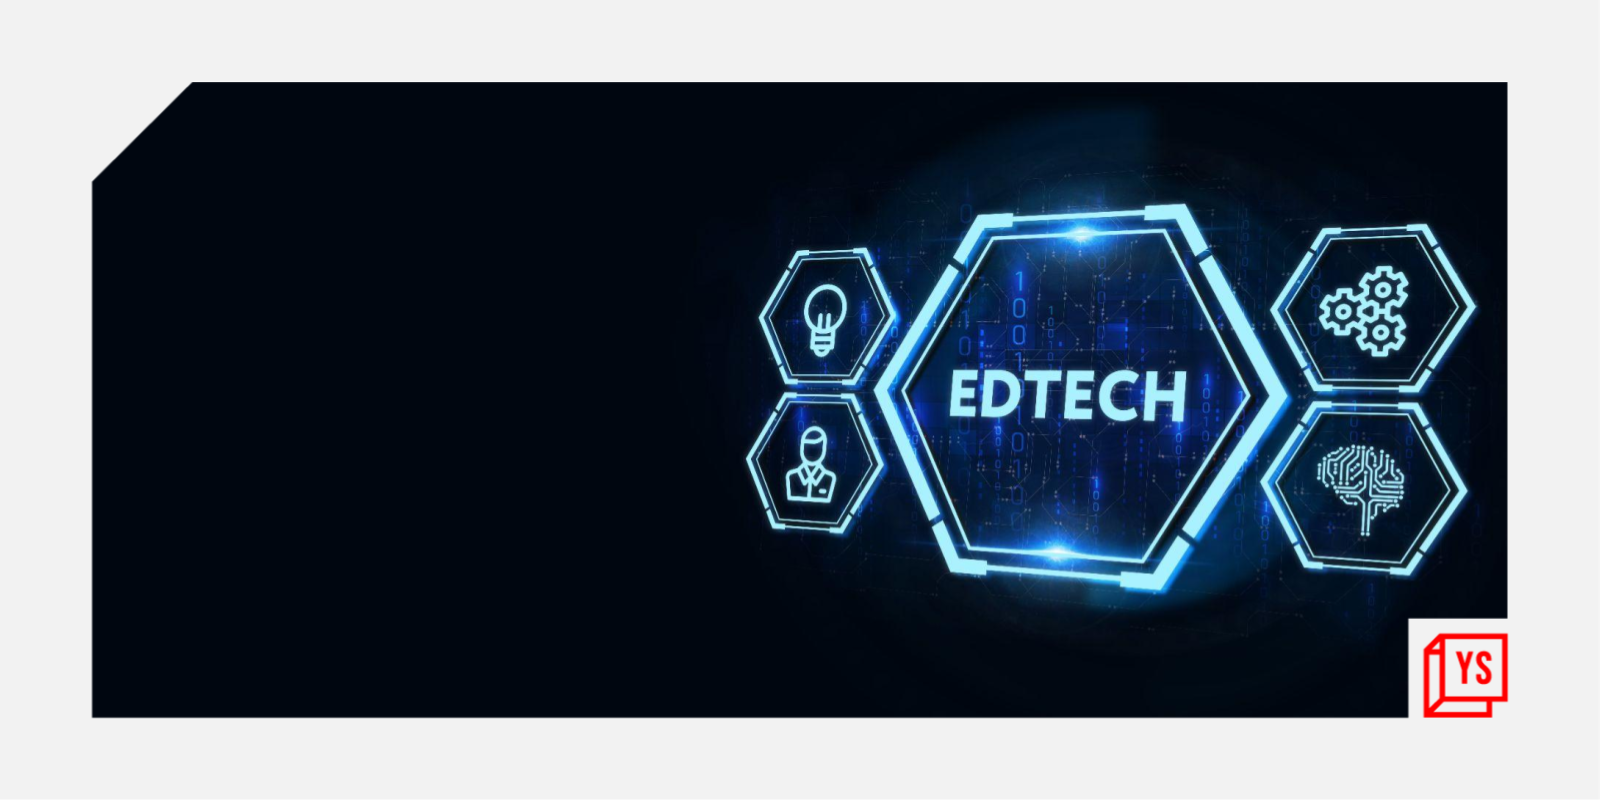 New trends in the edtech ecosystem

